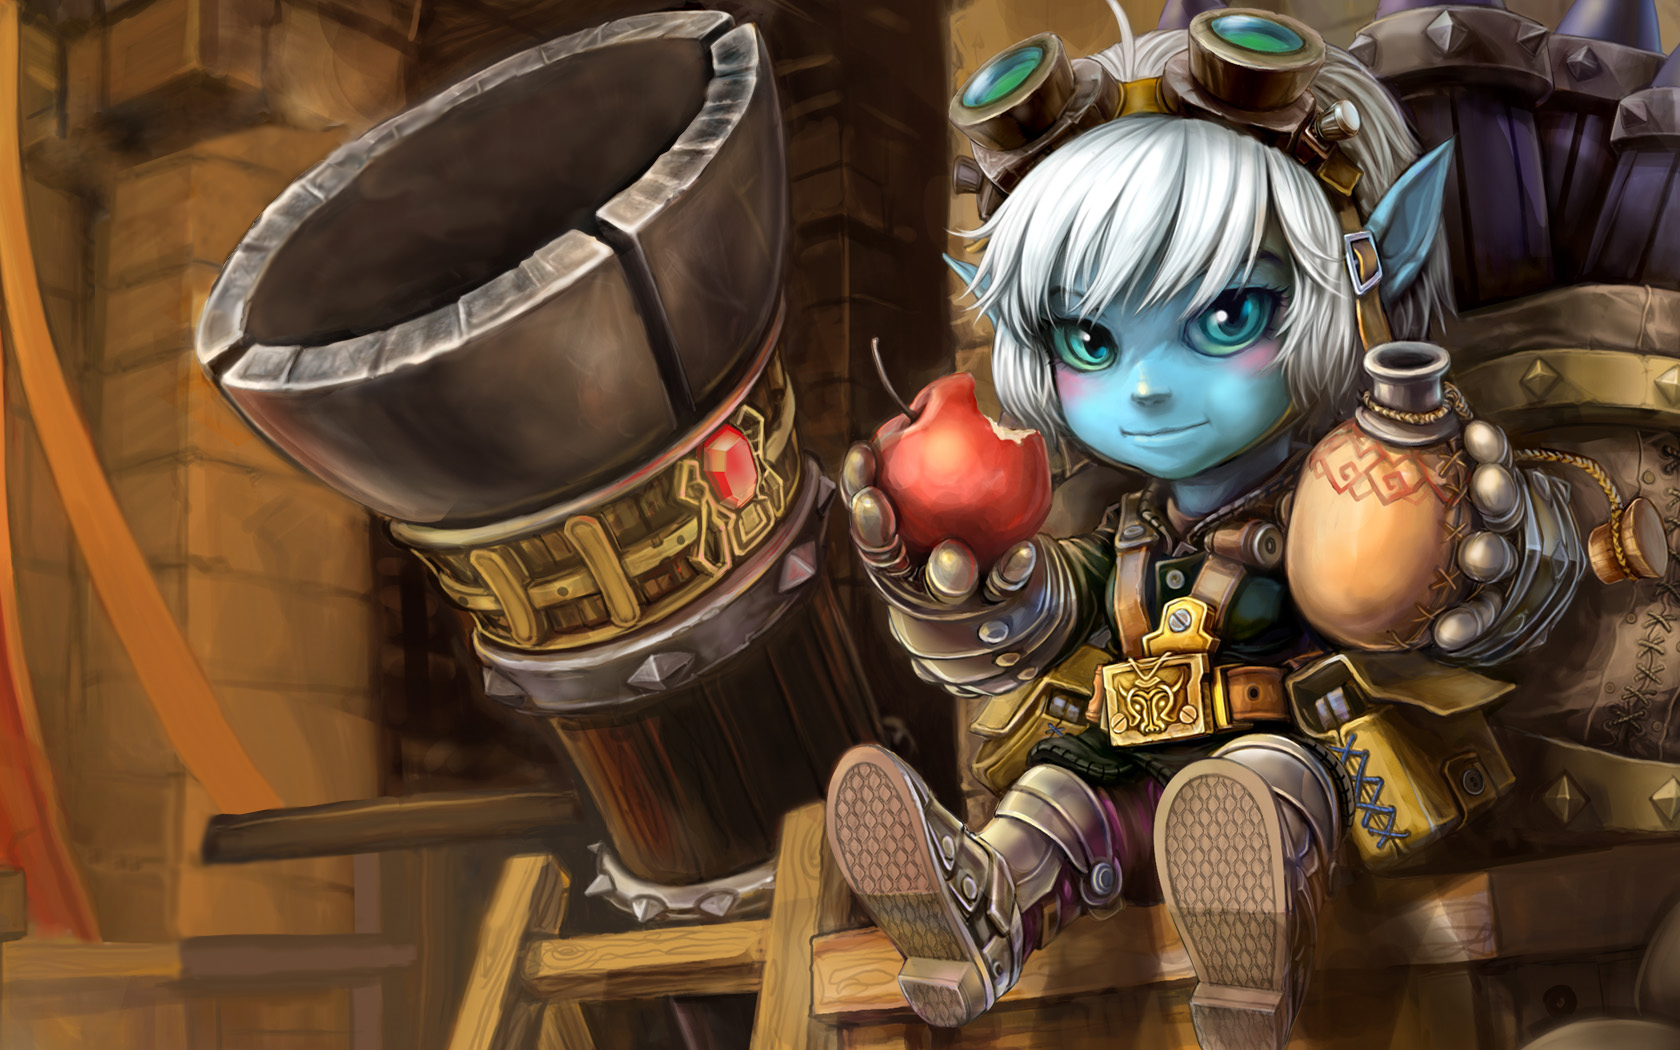 HD wallpaper of Tristana, a character from League of Legends.